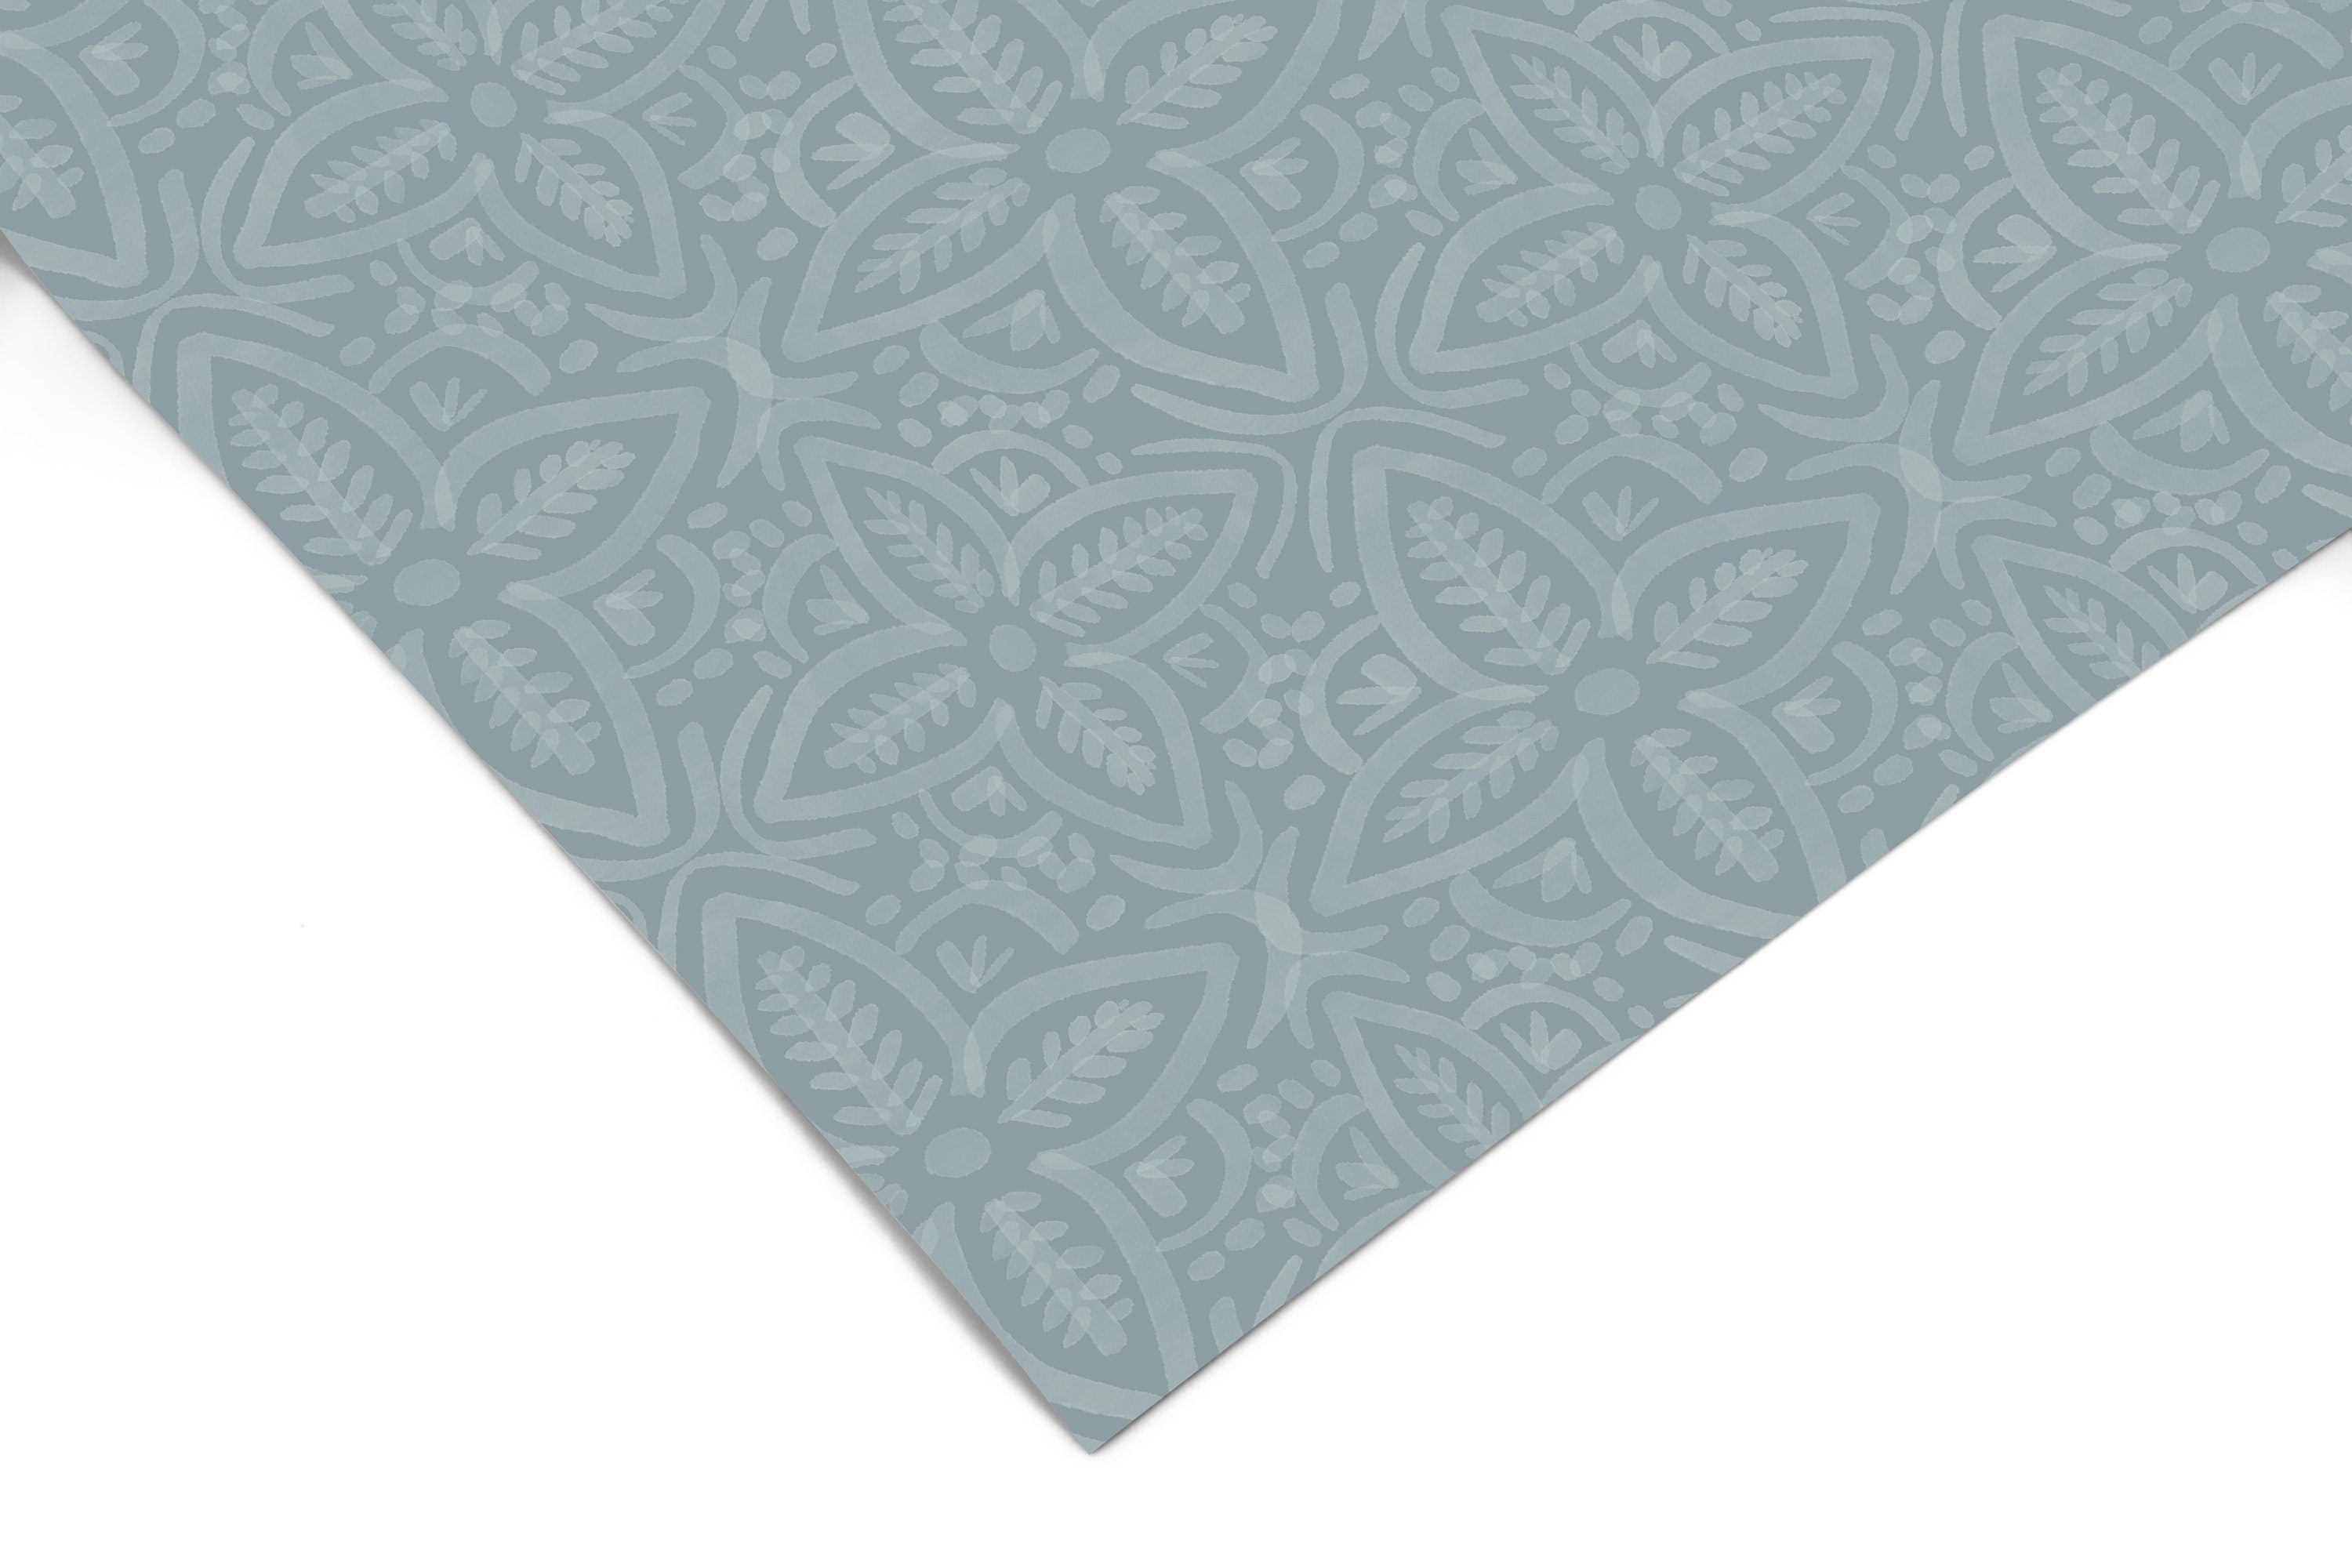 Neutral Beach Pattern Contact Paper | Peel And Stick Wallpaper | Removable Wallpaper | Shelf Liner | Drawer Liner | Peel and Stick Paper 974 - JamesAndColors